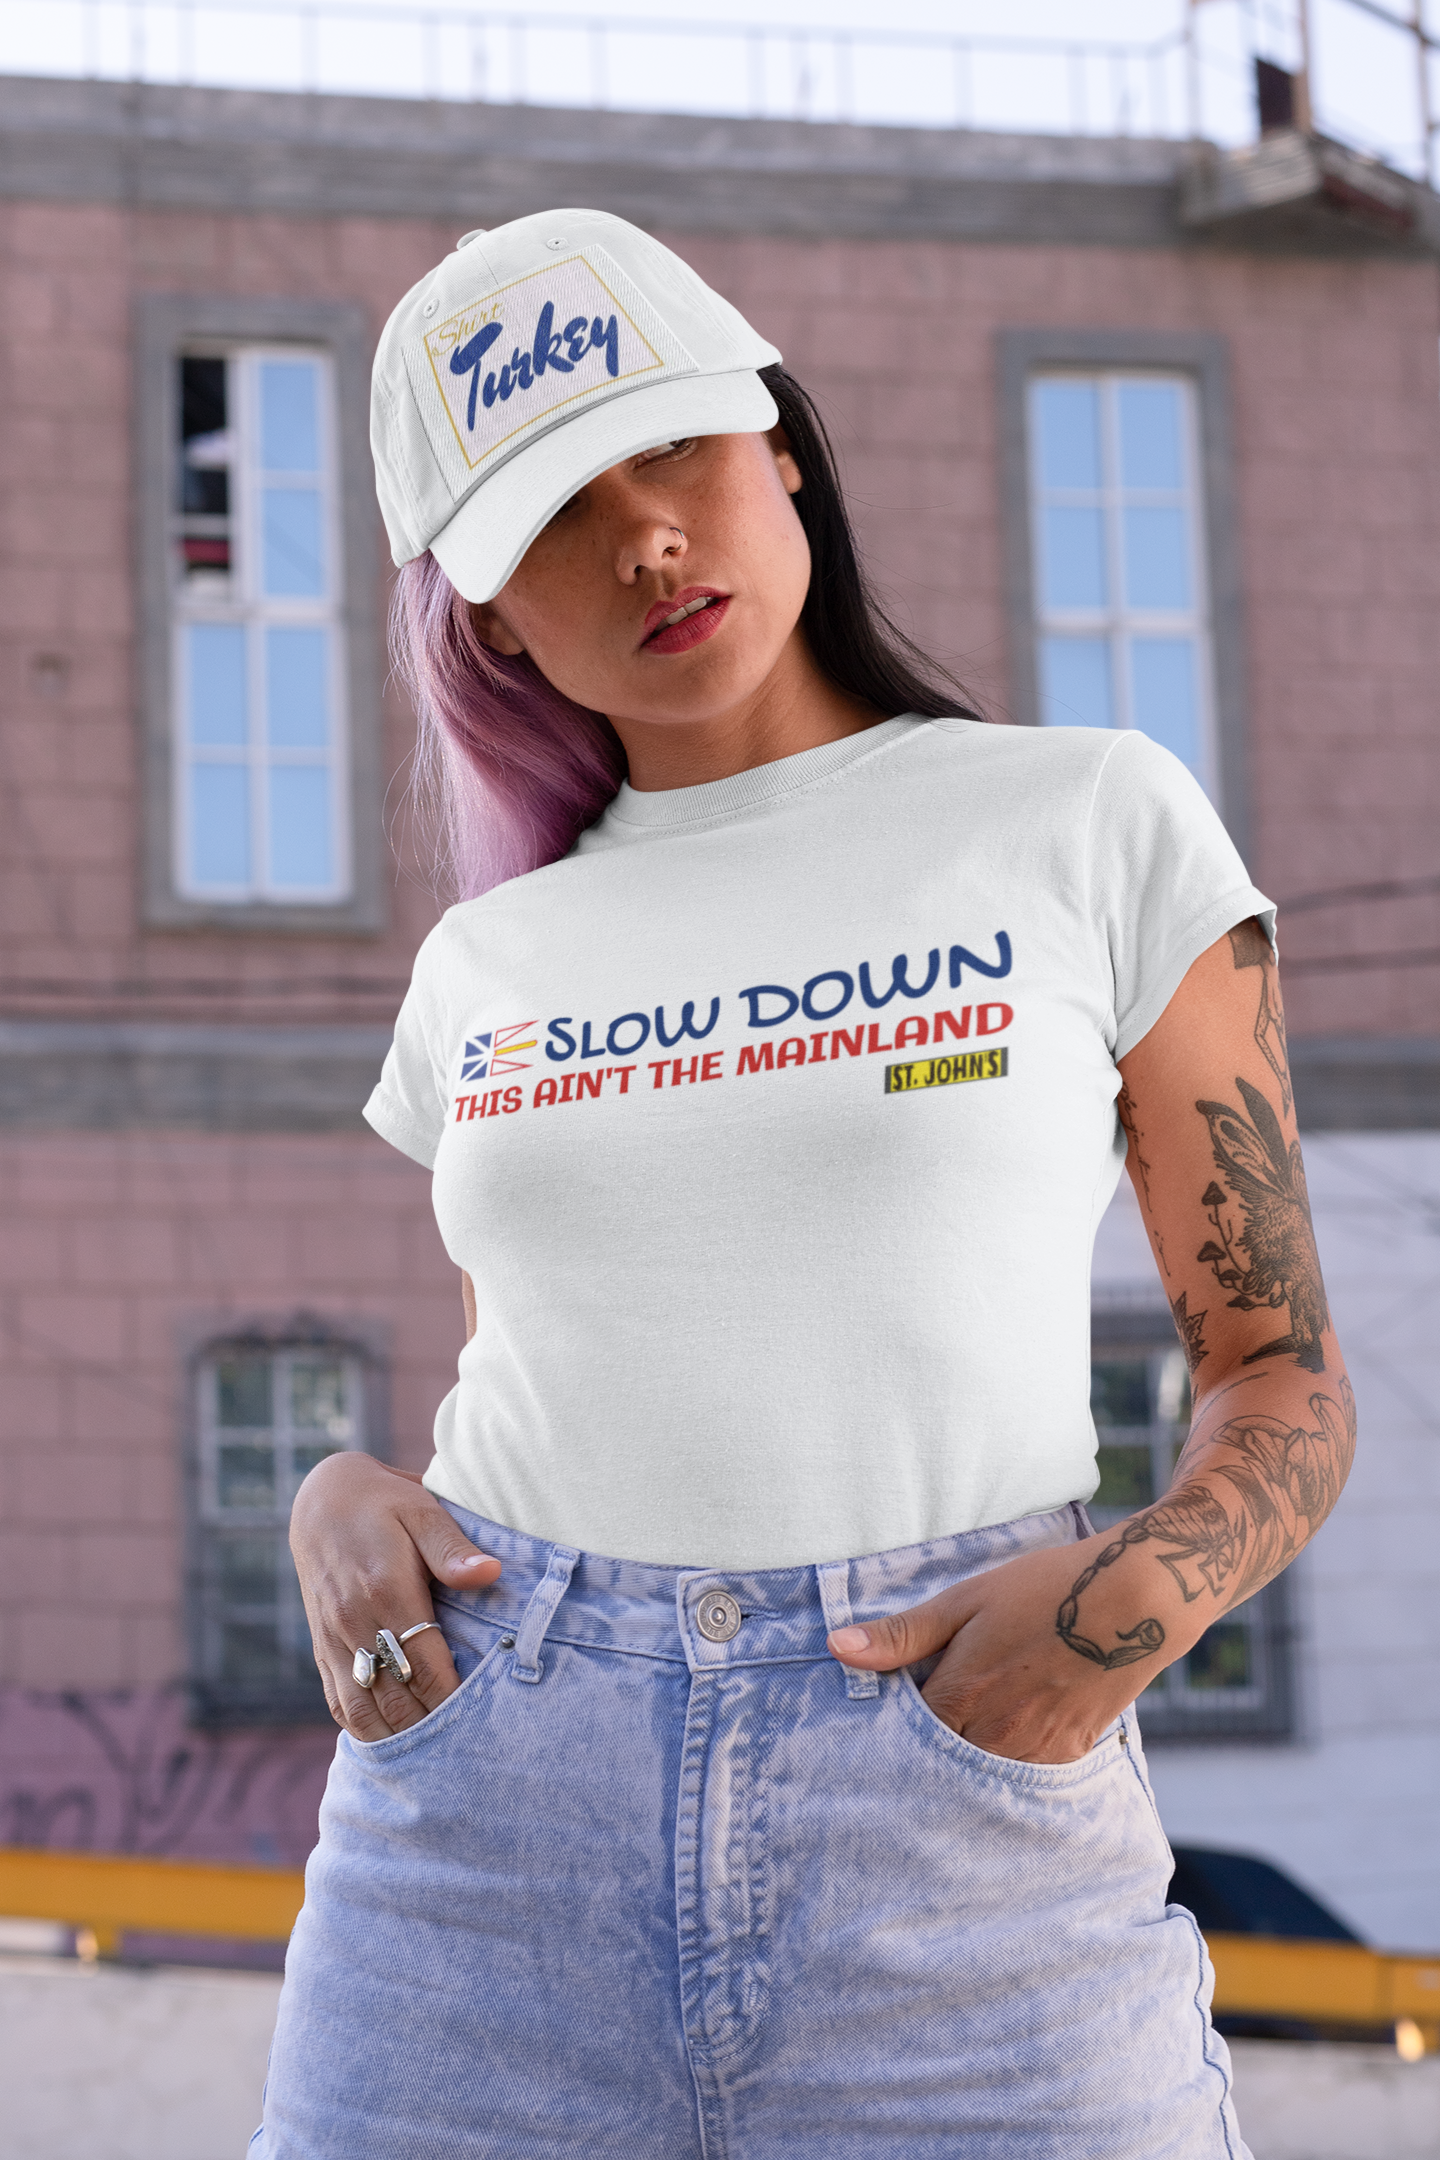 Newfoundland  "Slow Down This Ain't The Mainland" Saint John's NFLD Graphic Tee.